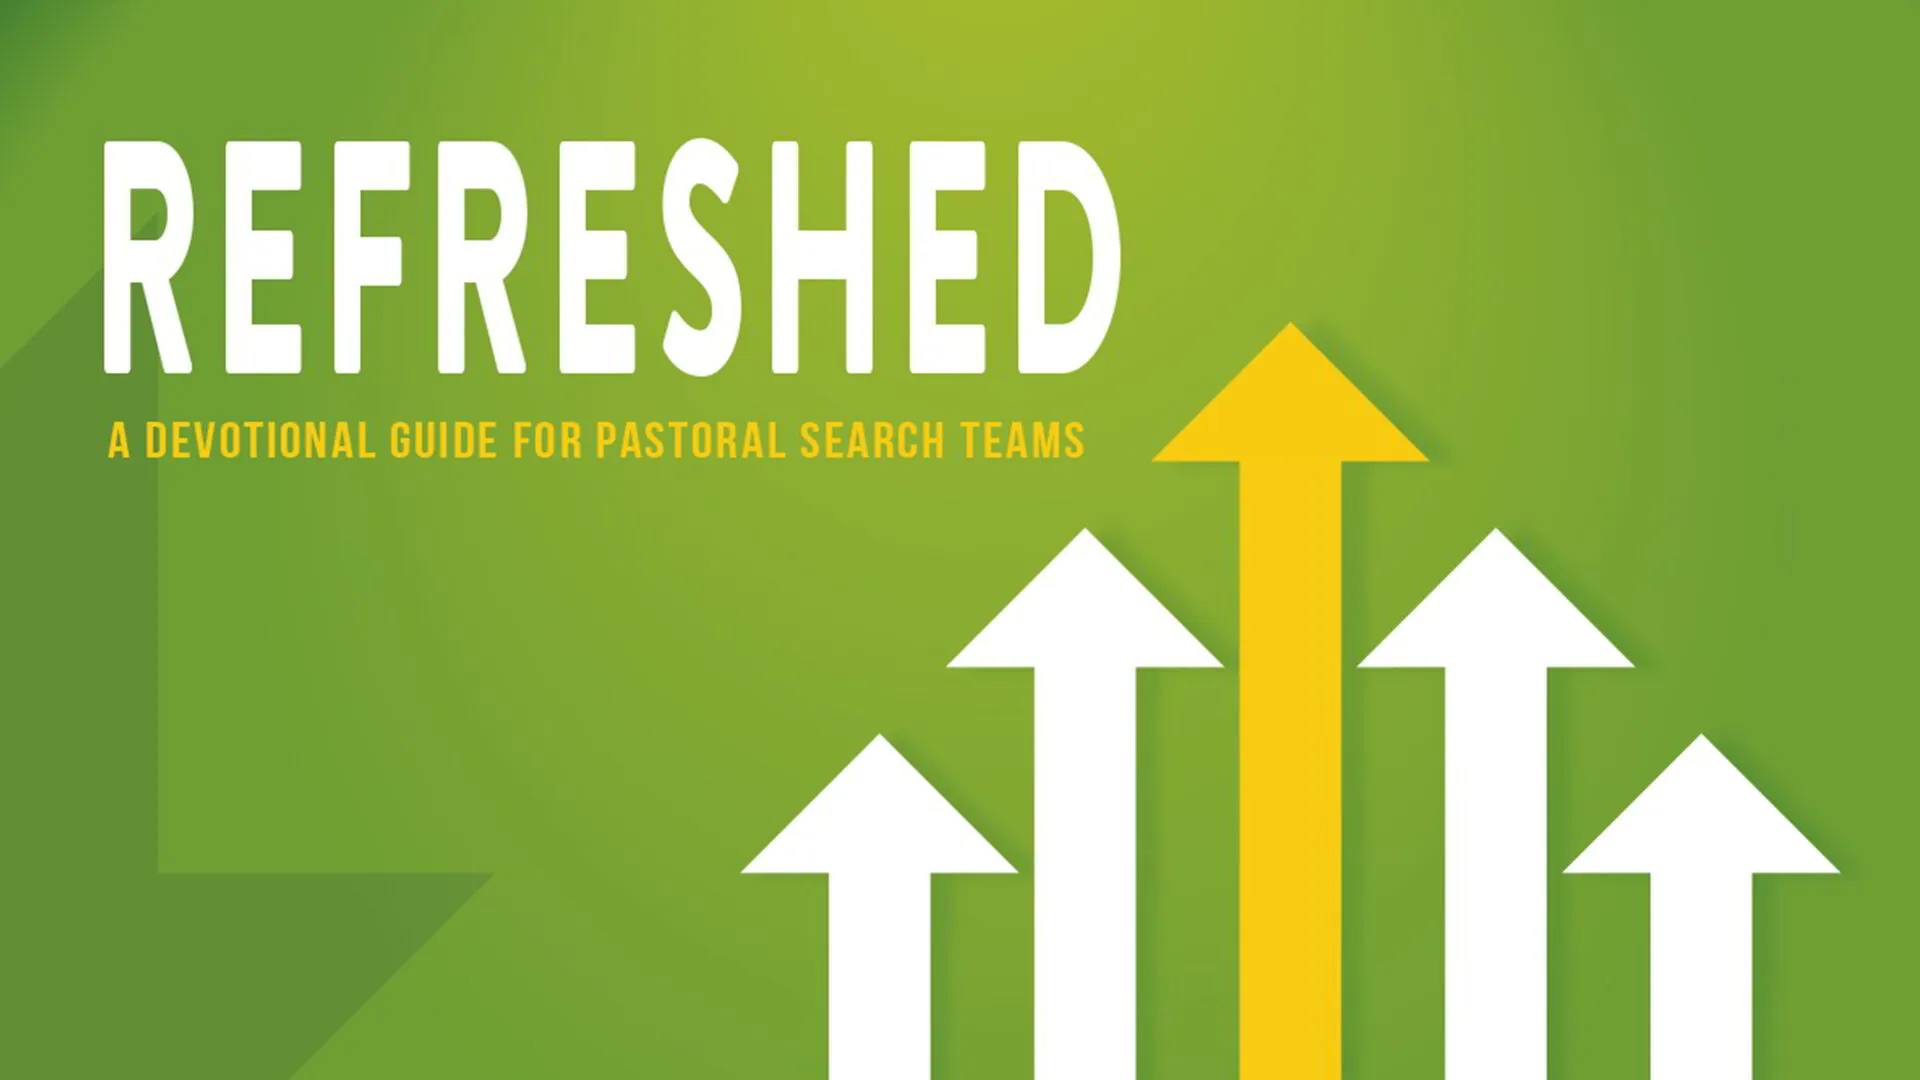 Refreshed, A Devotional Guide for Pastoral Search Teams